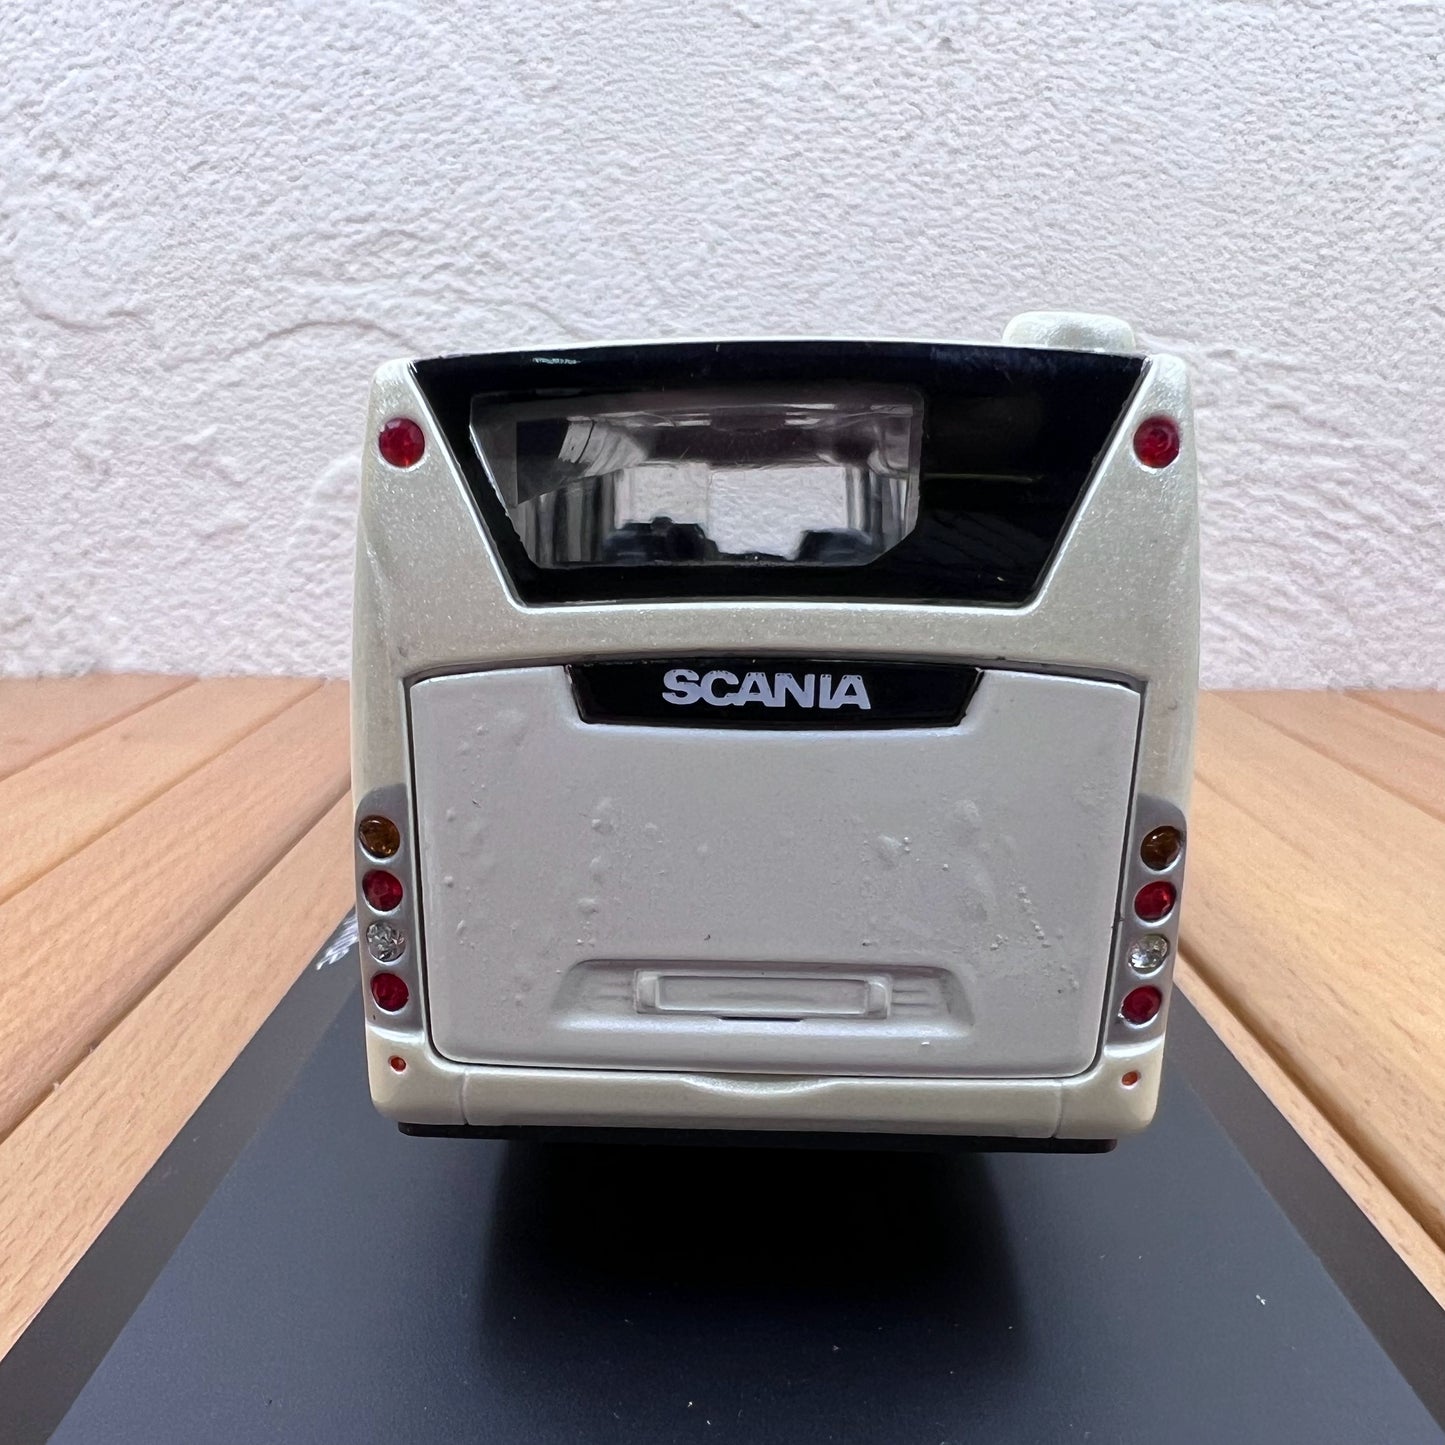 1/50 Scale Scania Citywide Bus Diecast Model Vehicle